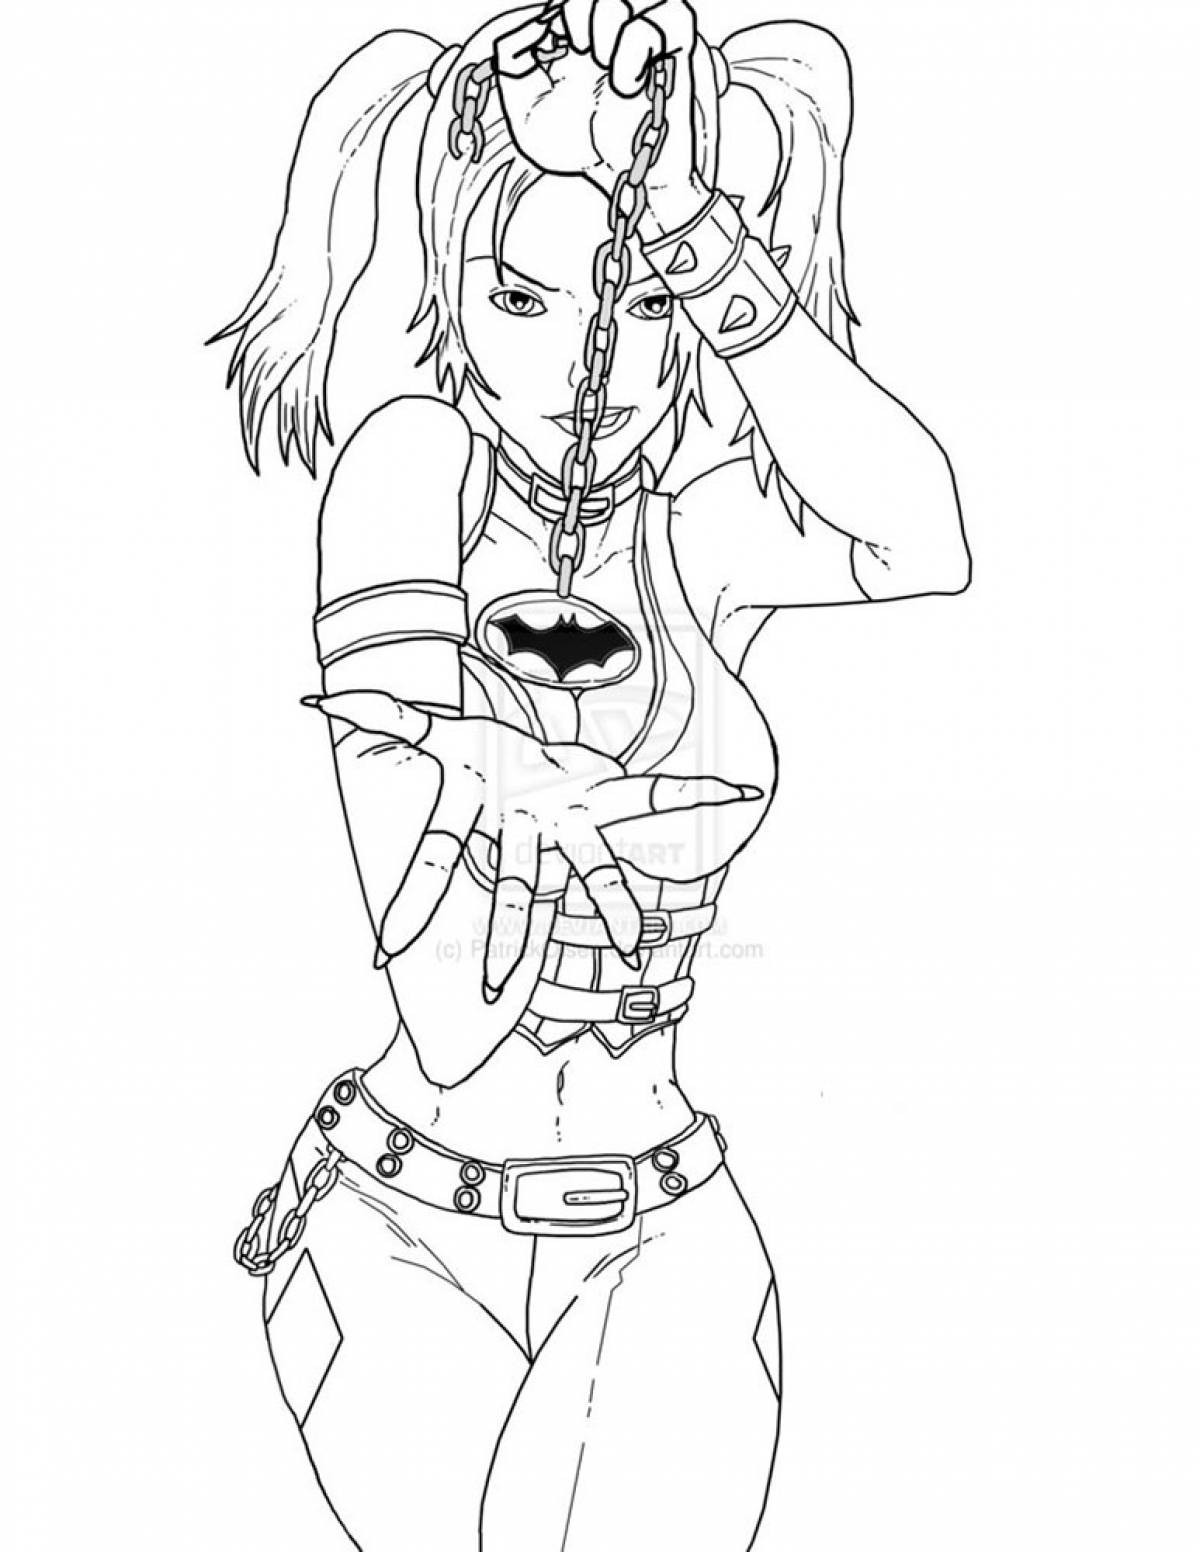 Harley quinn with chain